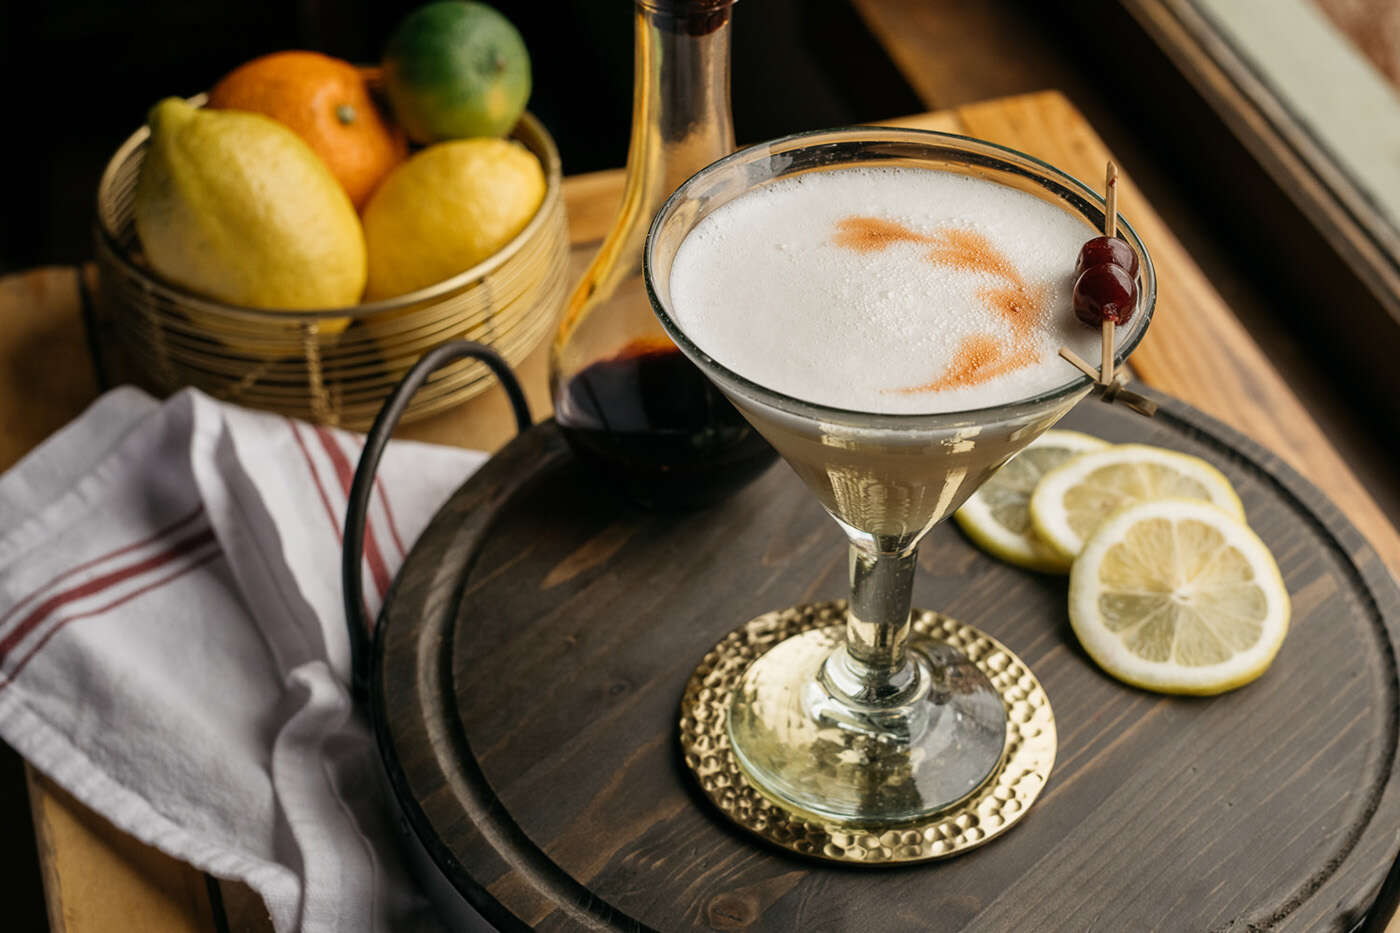 The High West Whiskey Sour